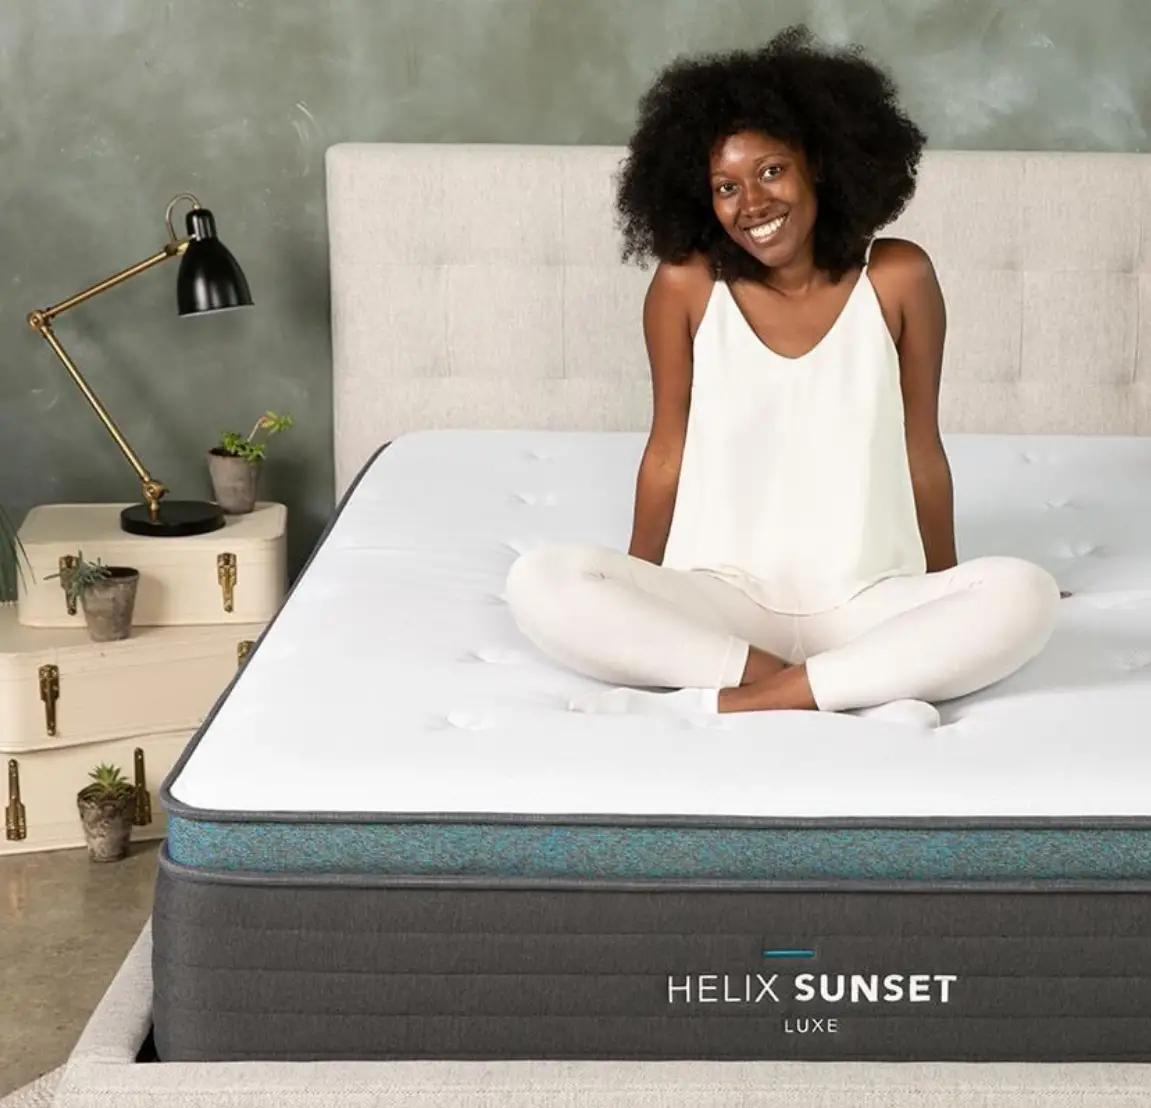 2020 Helix Luxe Mattress Review: Perfected Comfort